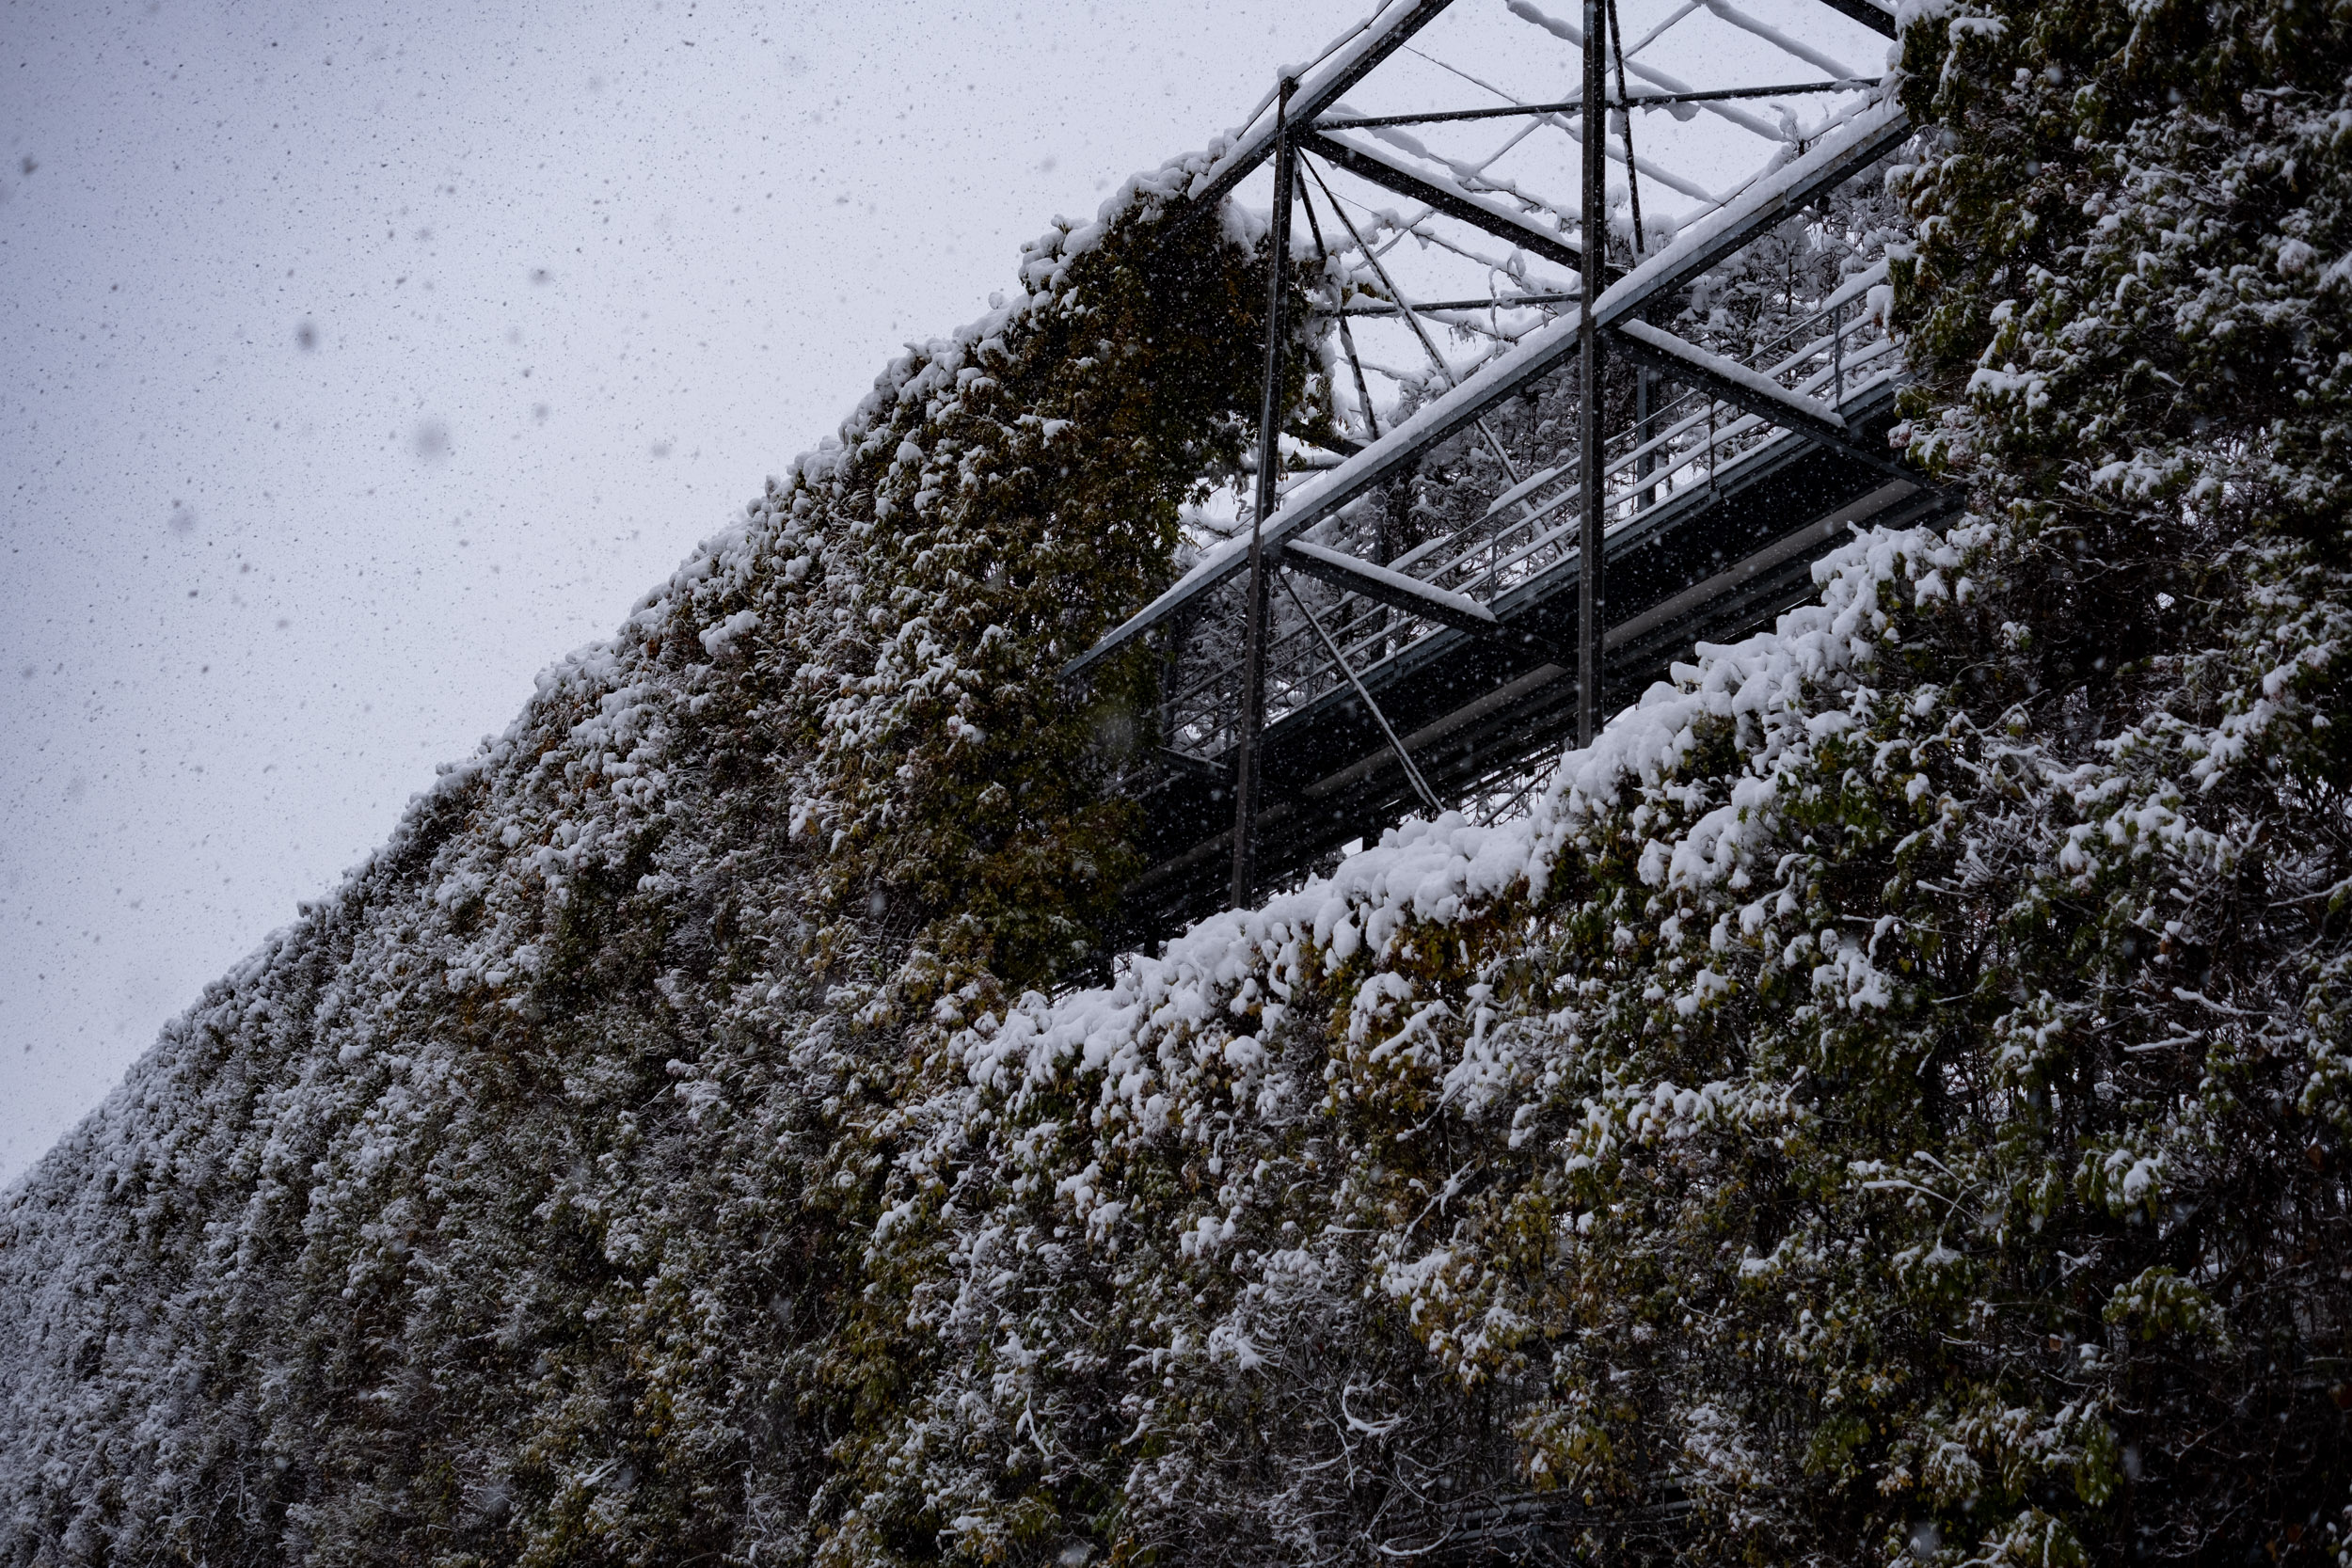 Loads of snow turned this metal structure with its climbing plants into a winter wonderland.